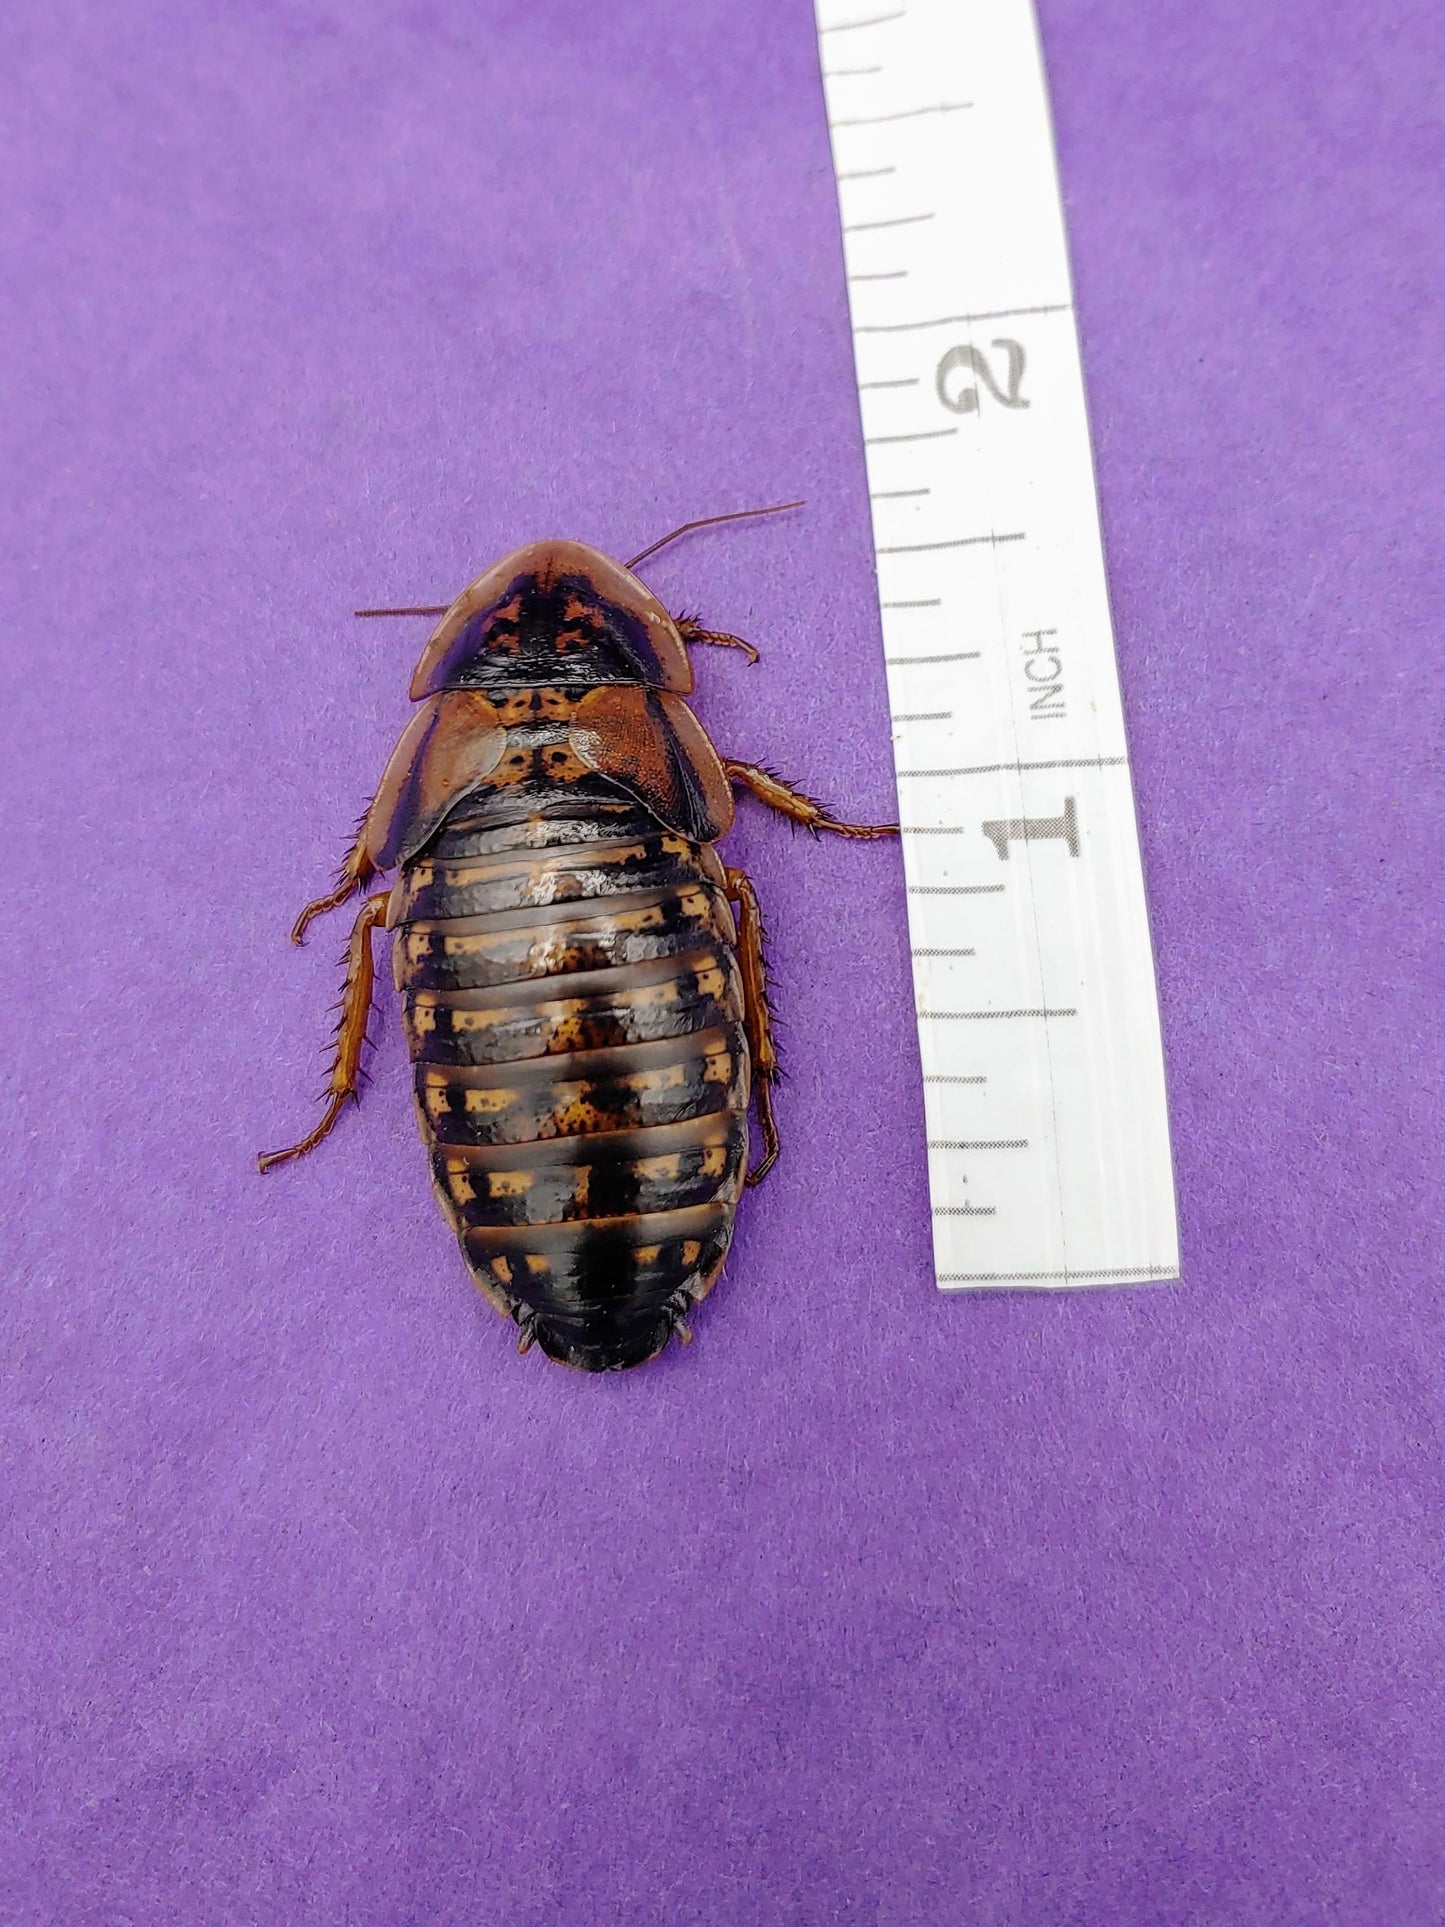 adult female dubia roaches